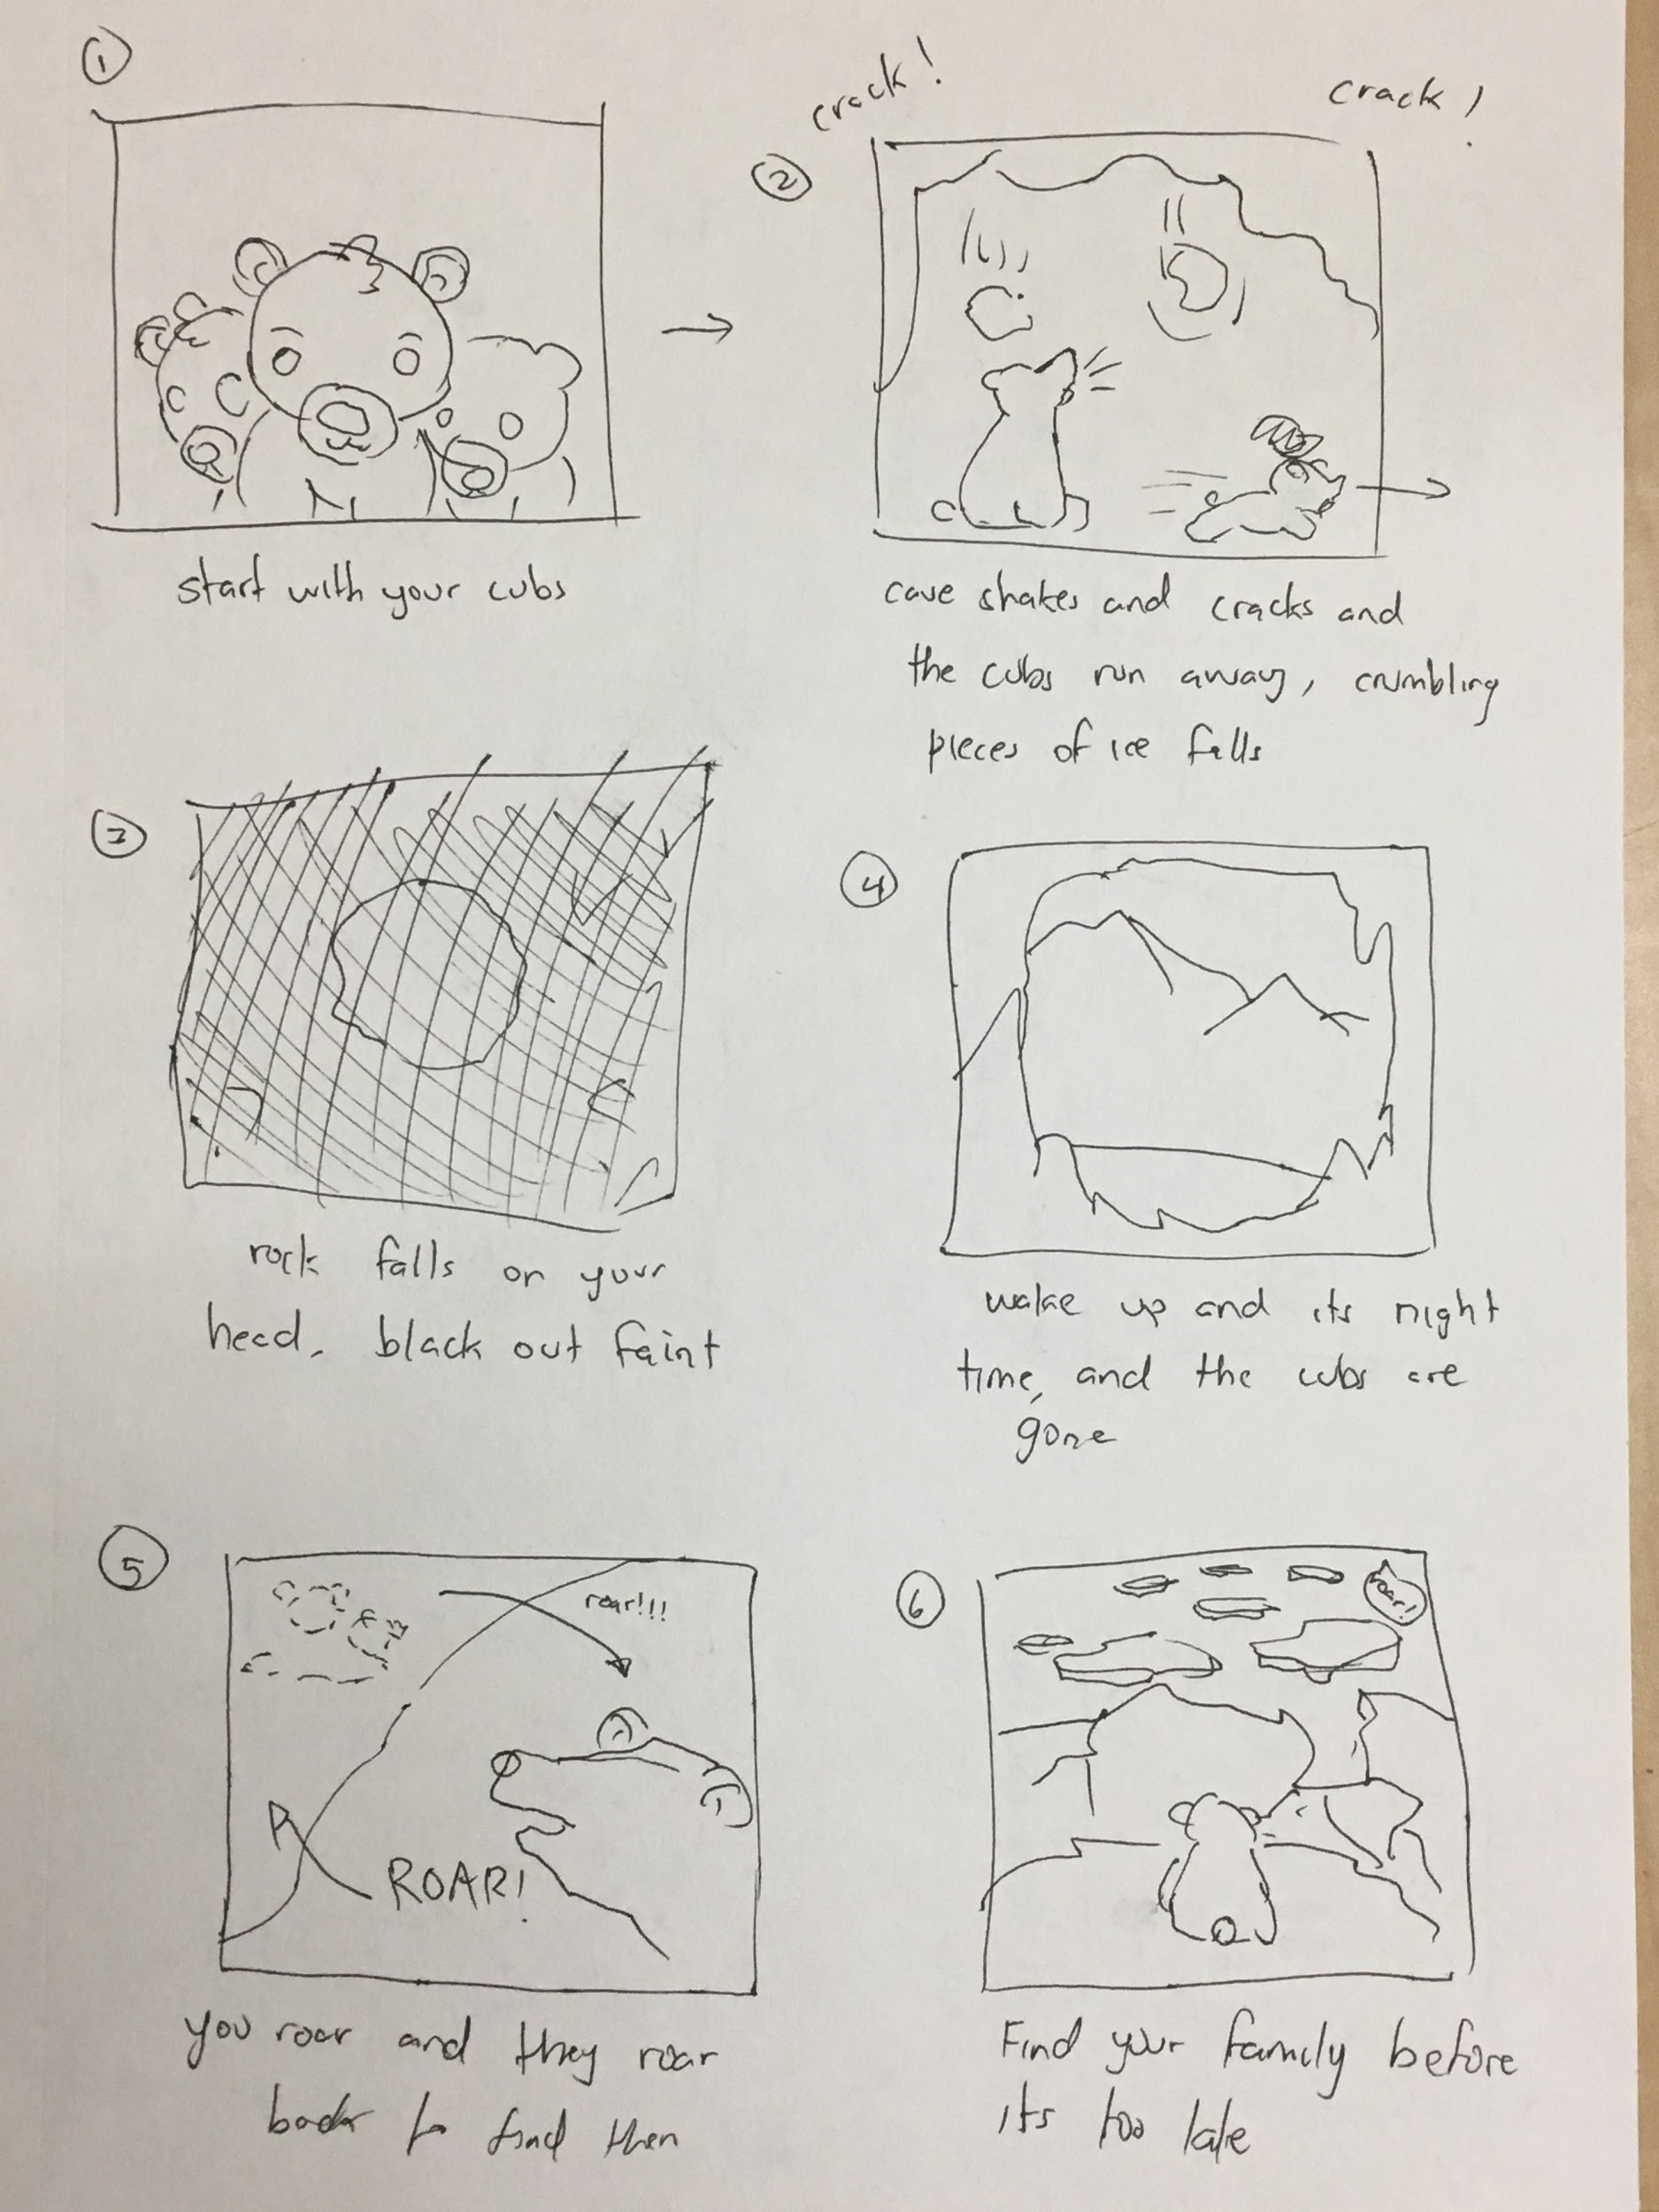 the storyboard for the narrative of the Echo virtual reality experience